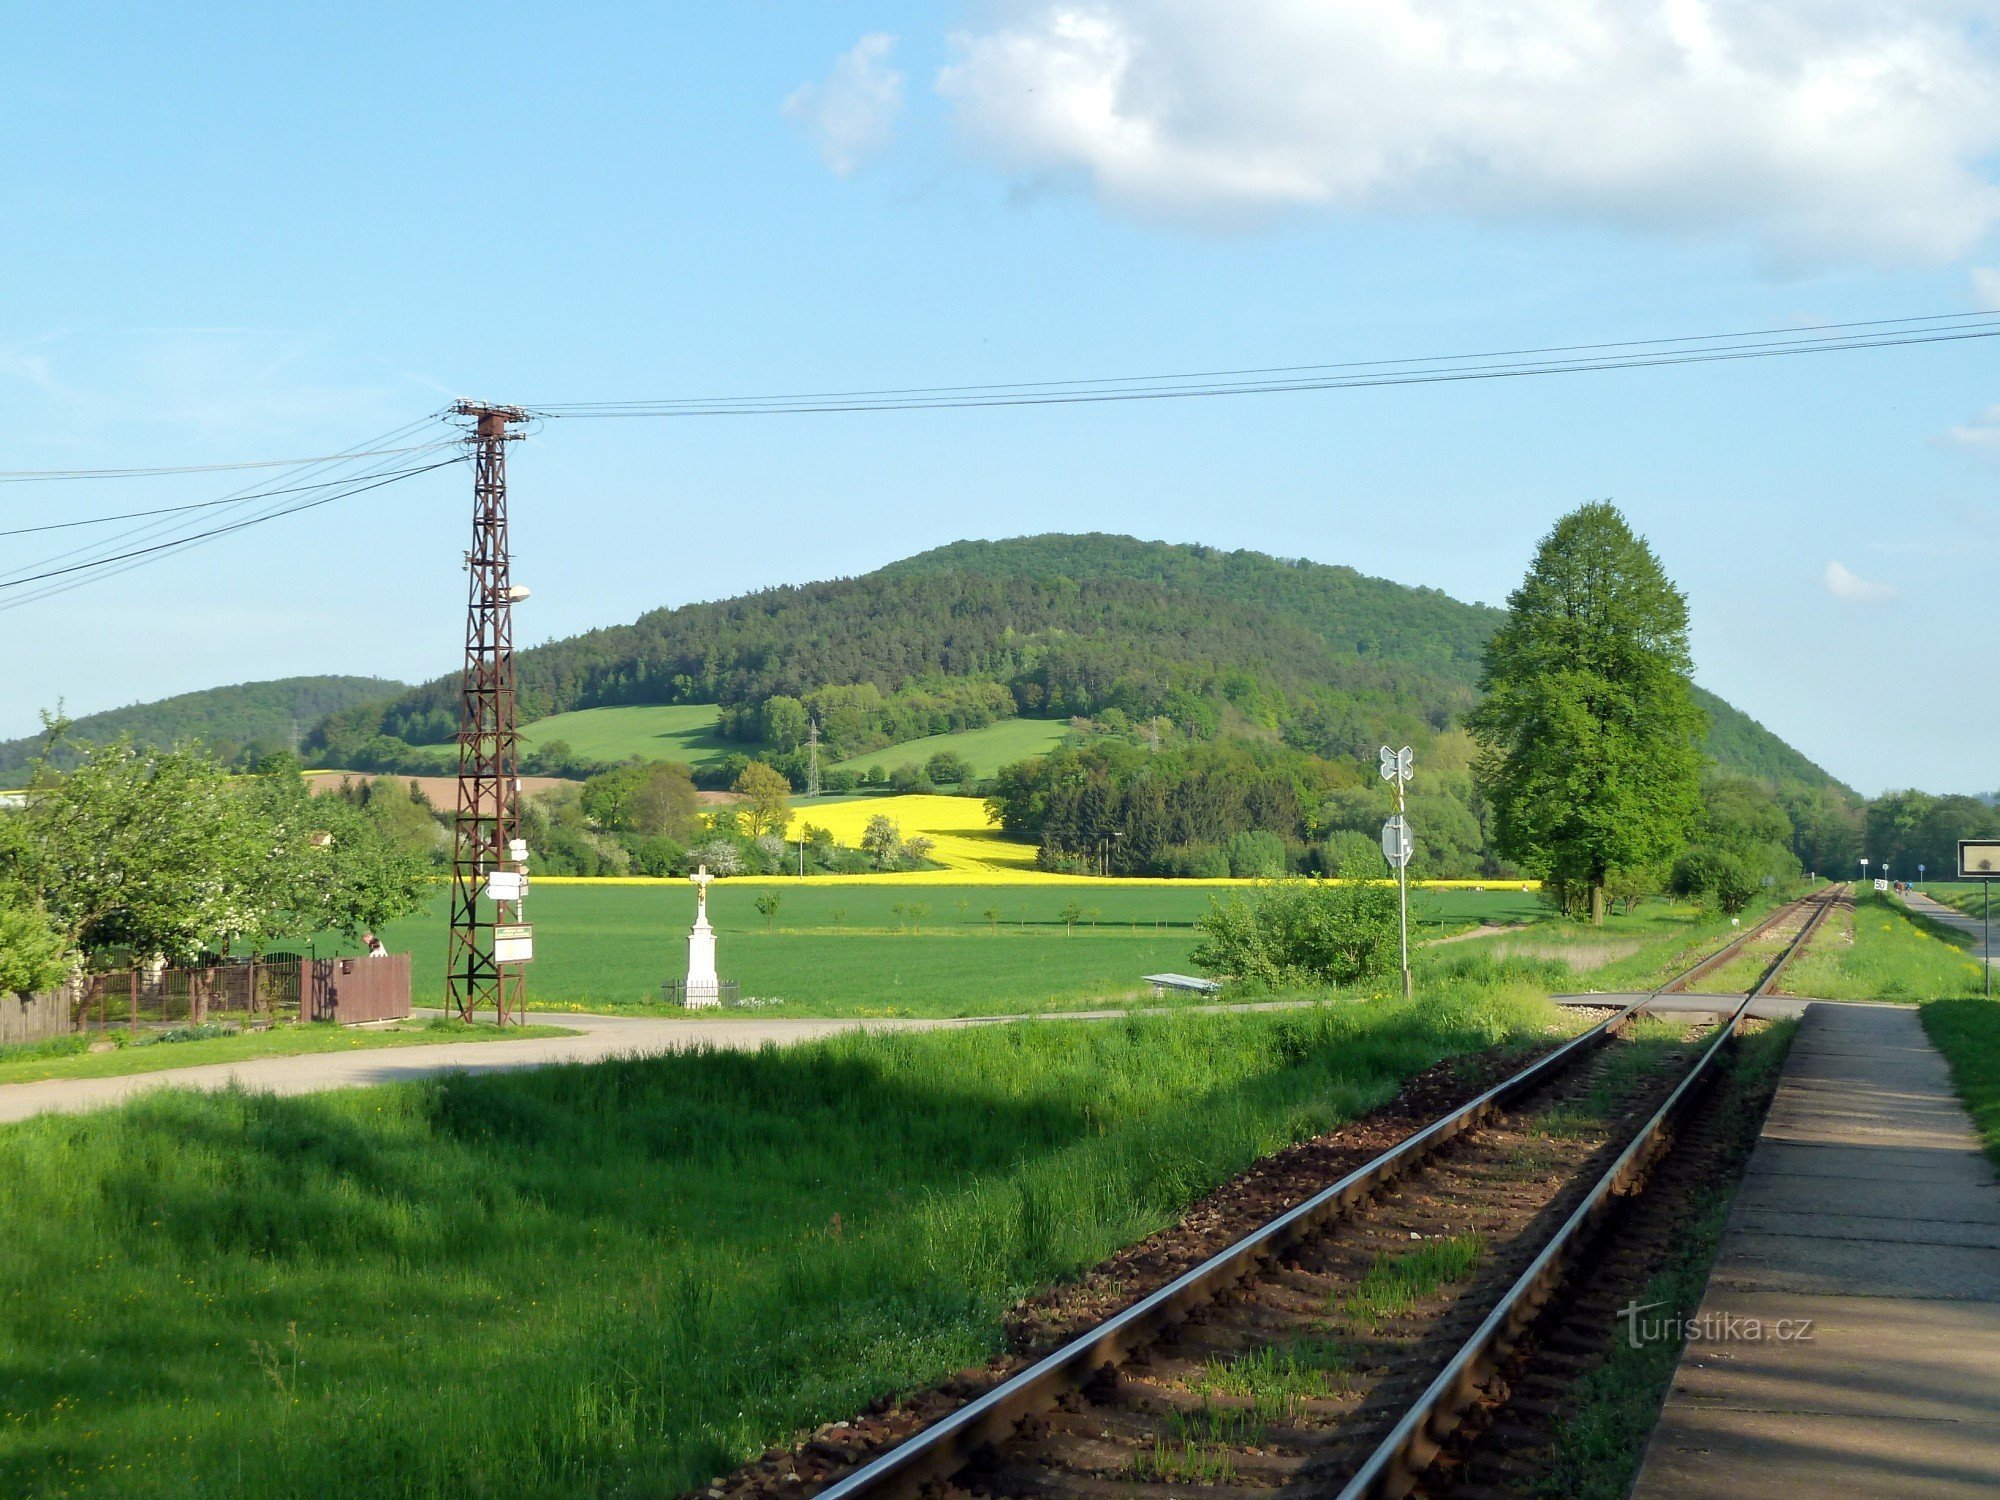 train stop - crossroads on the pillar in the left part of the photo